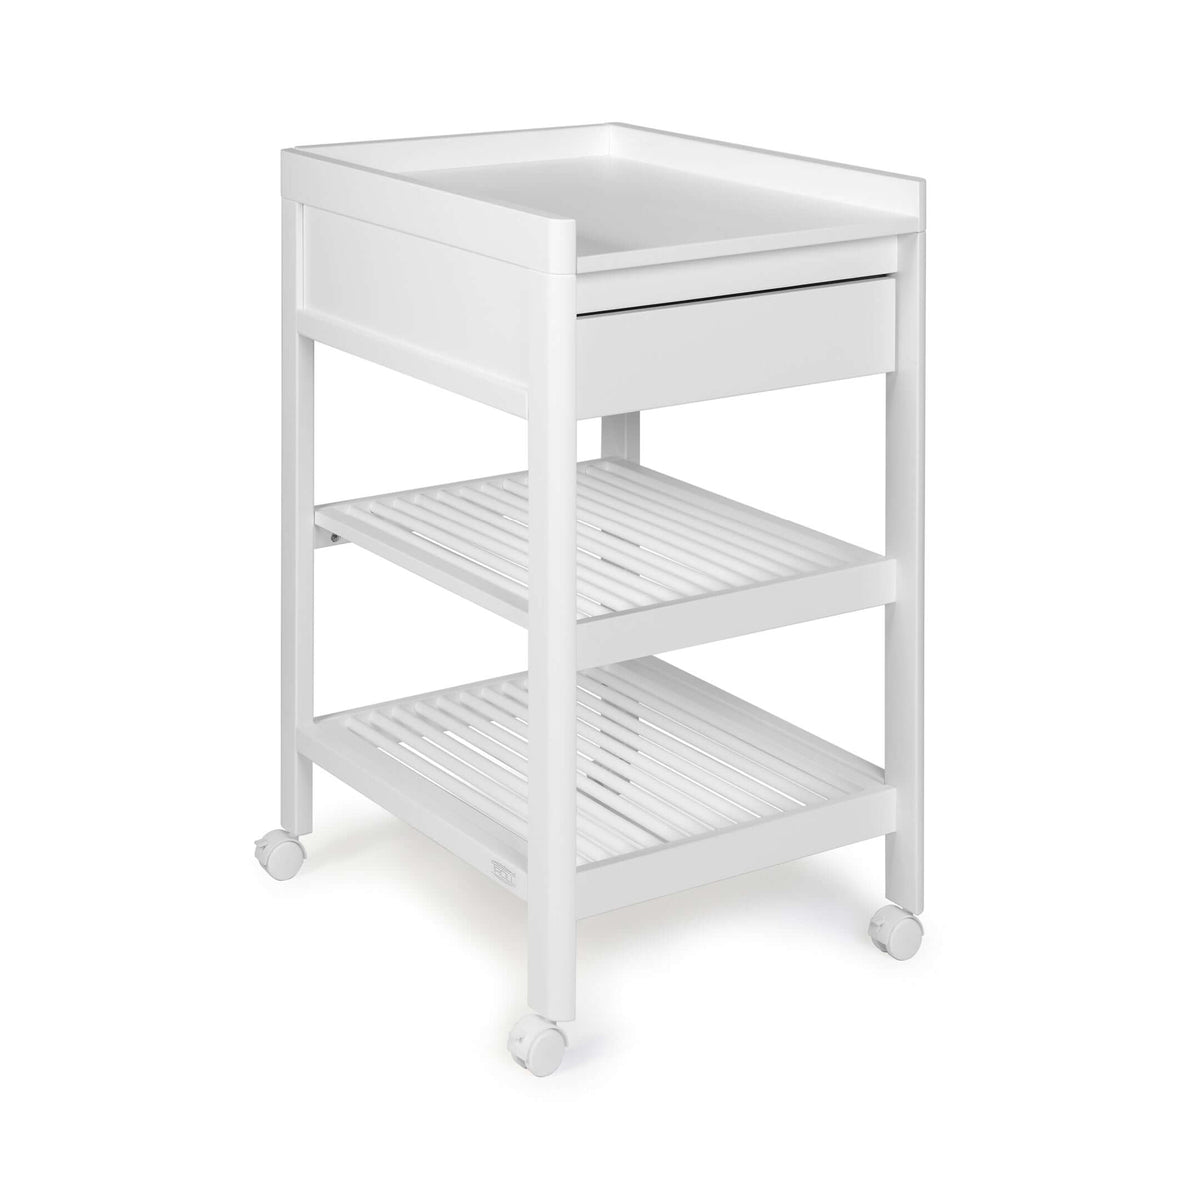 Changing table Lukas White